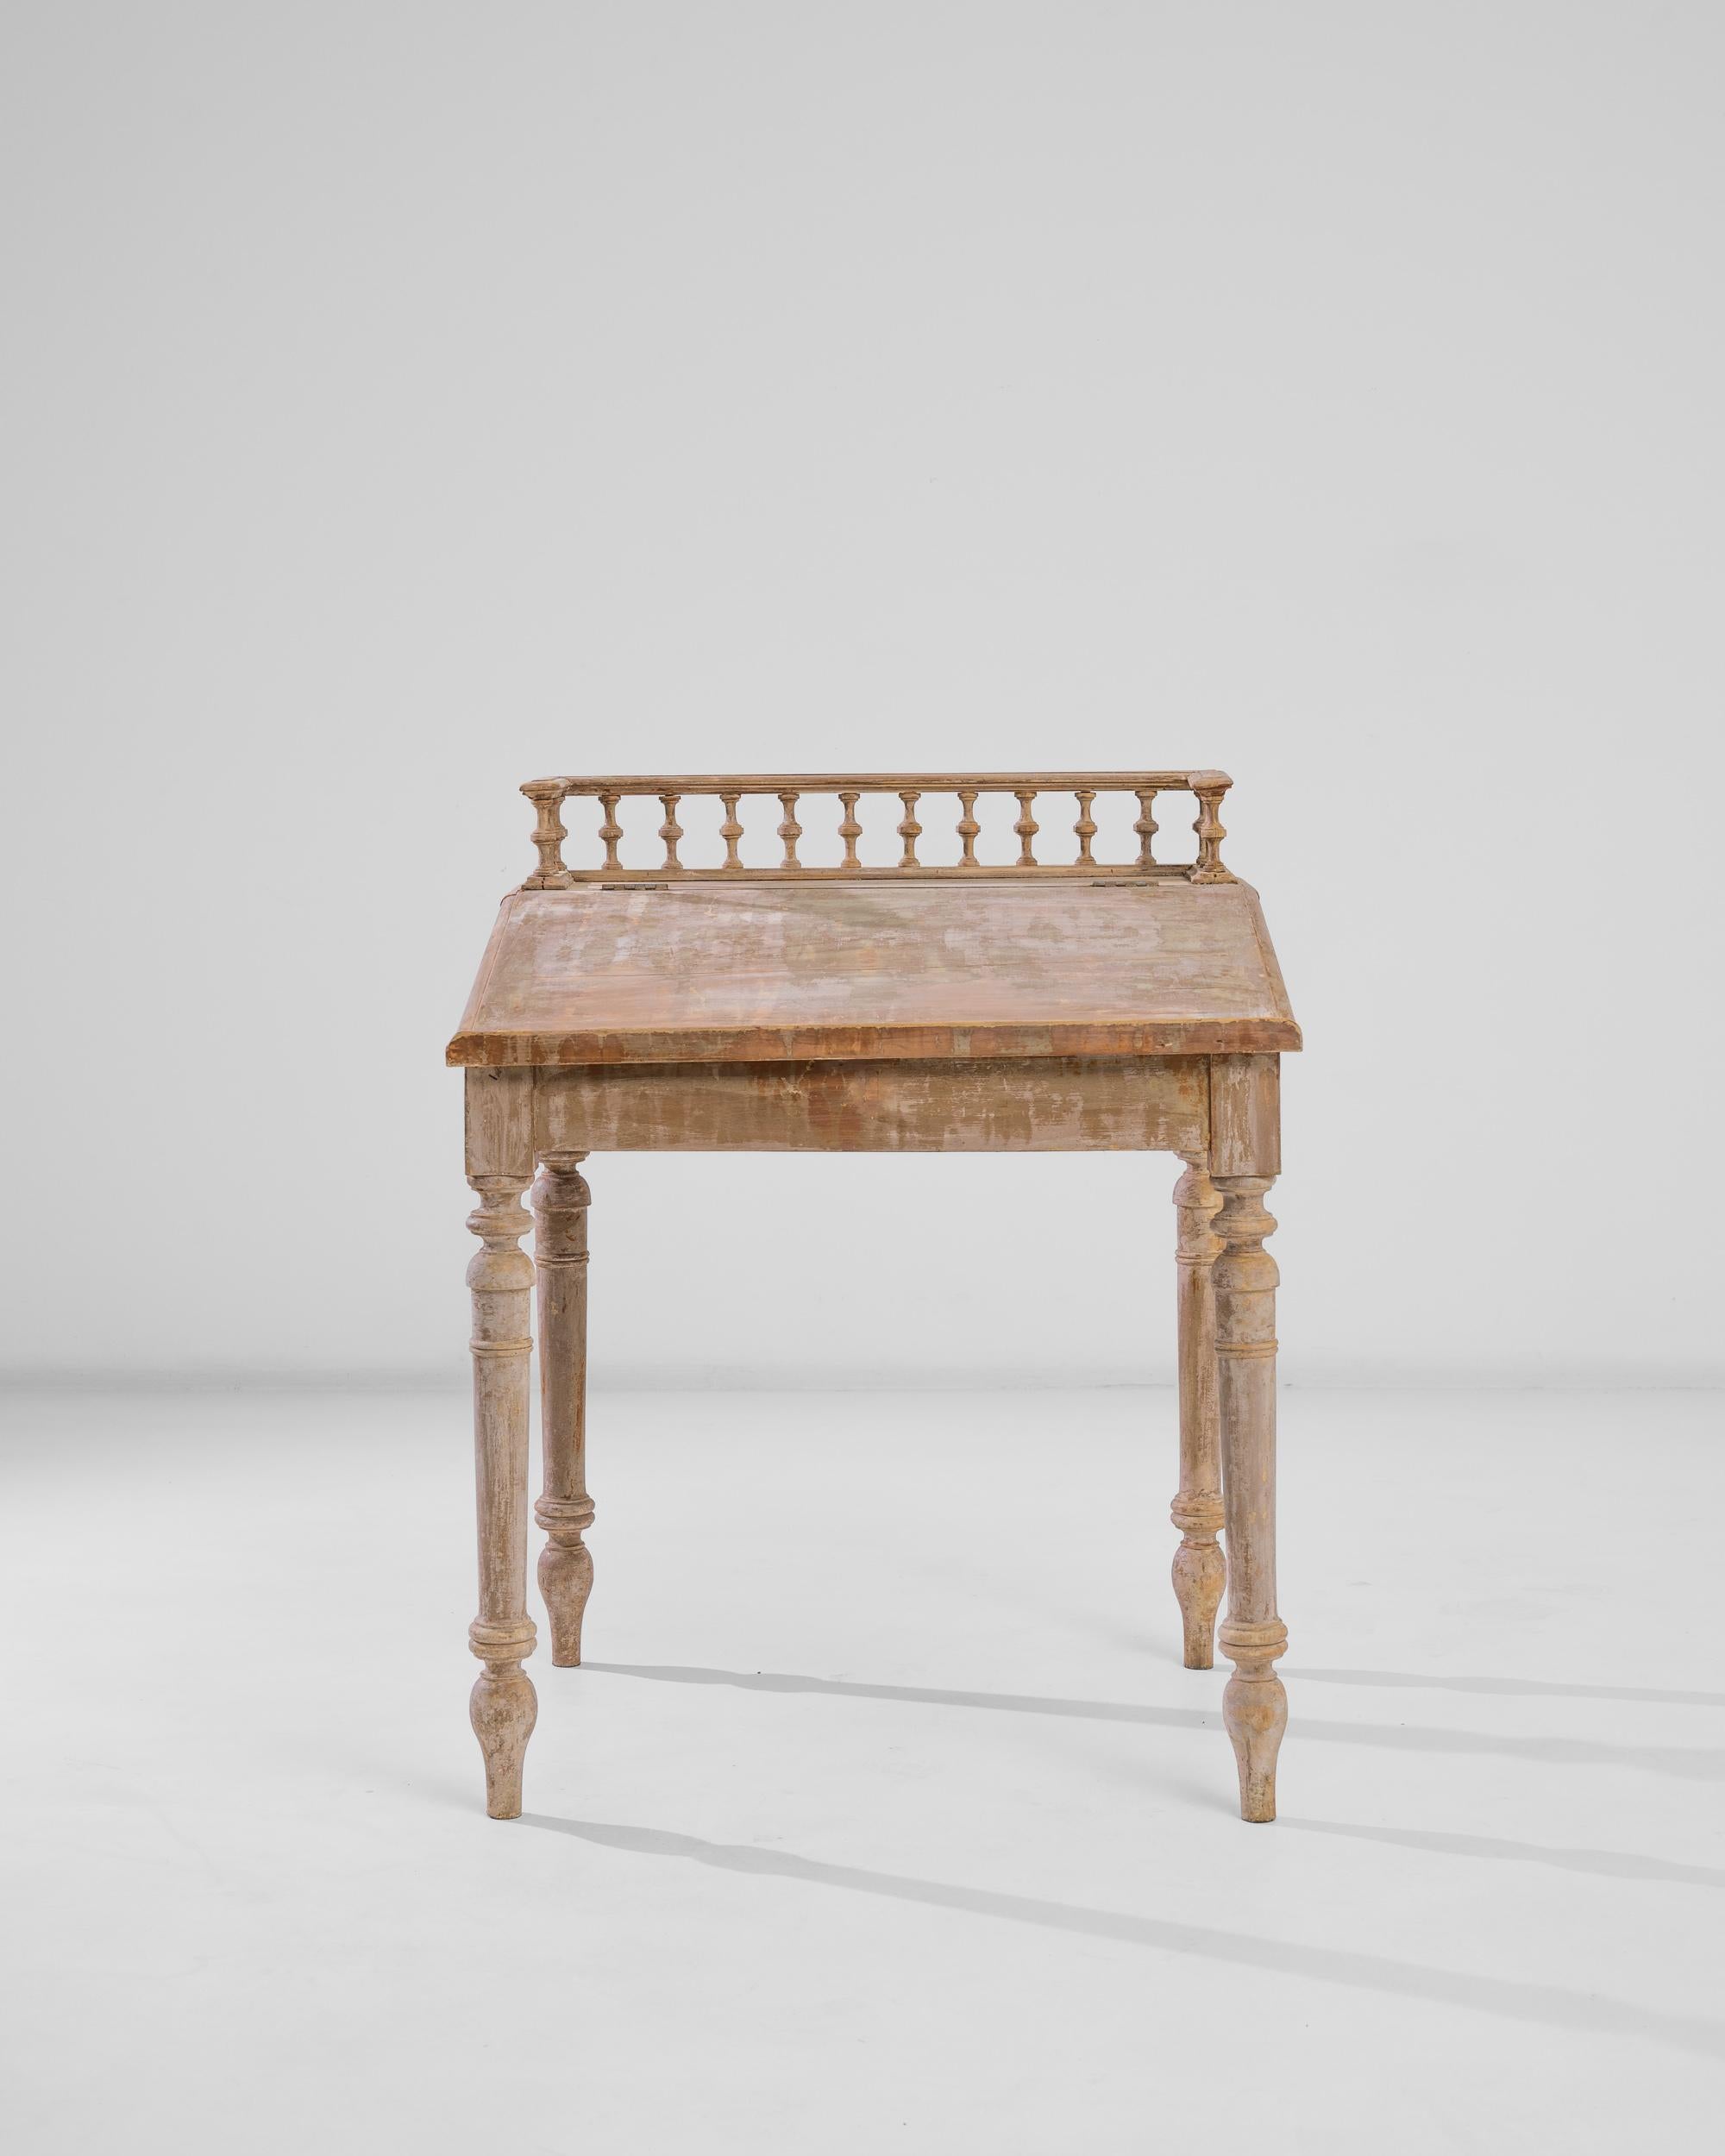 An antique writing desk from France, produced during the turn of the century. An elegant lift-top provides a practical sloping writing surface, crowned with a wooden gallery rail. Perched on ring turned legs with turnip feet, the lid can be lifted